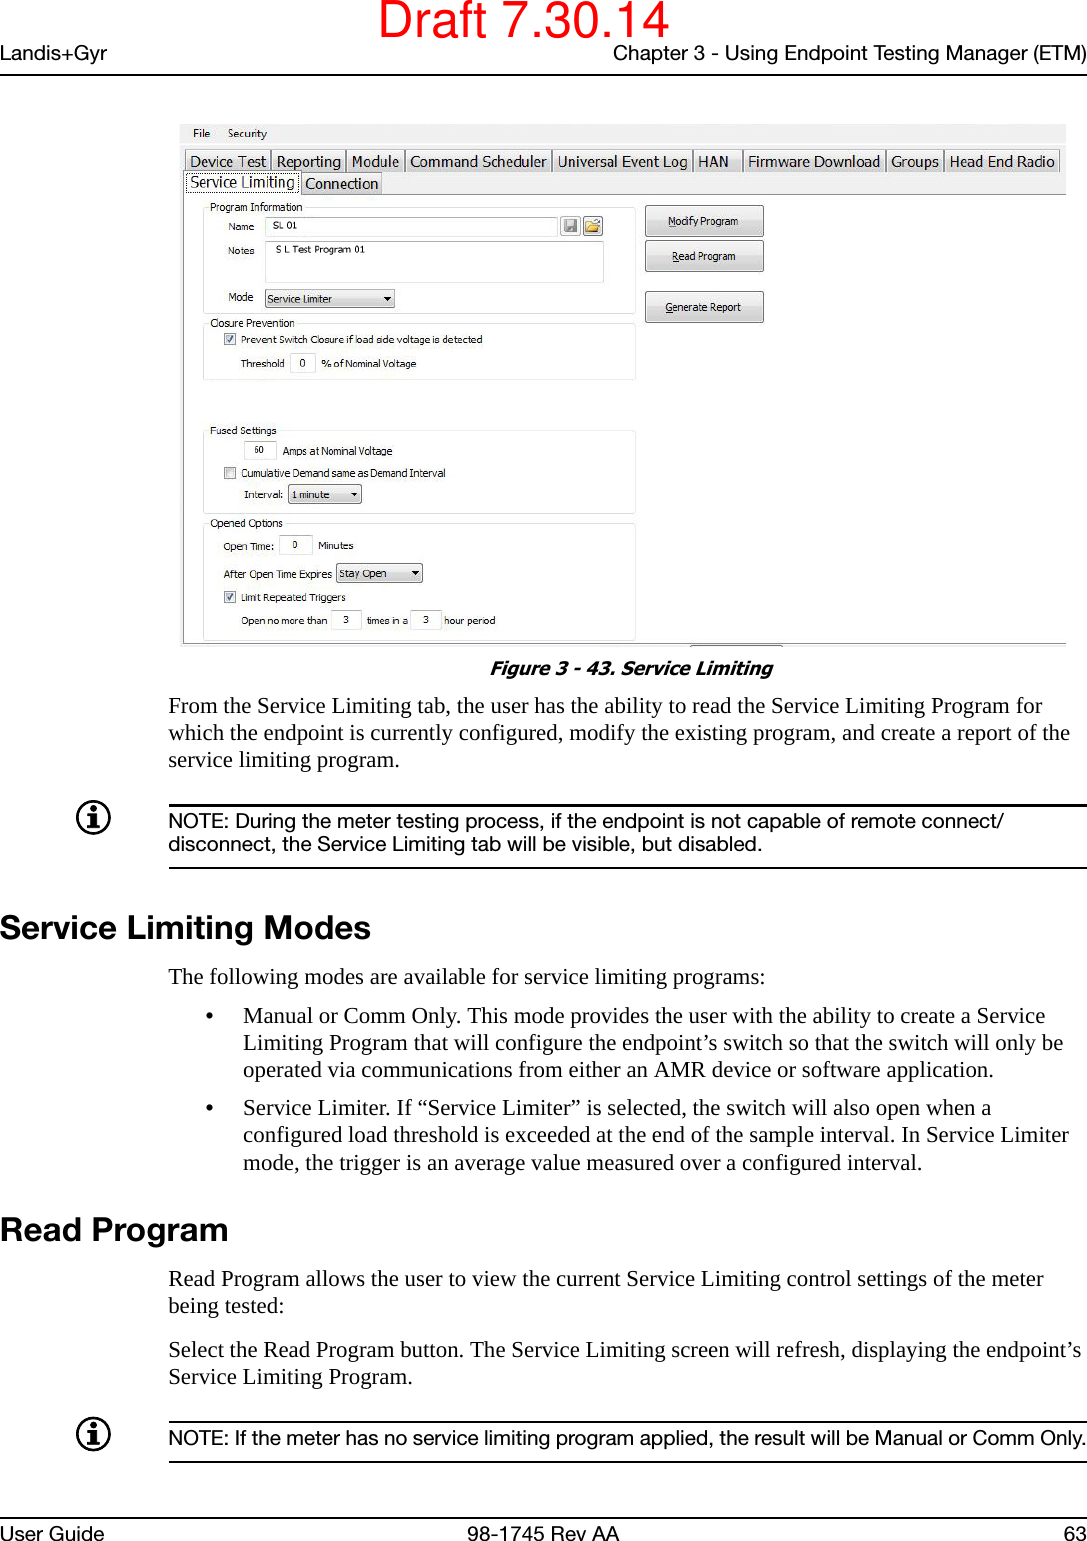 Landis+Gyr Chapter 3 - Using Endpoint Testing Manager (ETM)User Guide 98-1745 Rev AA 63 Figure 3 - 43. Service LimitingFrom the Service Limiting tab, the user has the ability to read the Service Limiting Program for which the endpoint is currently configured, modify the existing program, and create a report of the service limiting program.NOTE: During the meter testing process, if the endpoint is not capable of remote connect/disconnect, the Service Limiting tab will be visible, but disabled.Service Limiting ModesThe following modes are available for service limiting programs:•Manual or Comm Only. This mode provides the user with the ability to create a Service Limiting Program that will configure the endpoint’s switch so that the switch will only be operated via communications from either an AMR device or software application.•Service Limiter. If “Service Limiter” is selected, the switch will also open when a configured load threshold is exceeded at the end of the sample interval. In Service Limiter mode, the trigger is an average value measured over a configured interval.Read ProgramRead Program allows the user to view the current Service Limiting control settings of the meter being tested:Select the Read Program button. The Service Limiting screen will refresh, displaying the endpoint’s Service Limiting Program.NOTE: If the meter has no service limiting program applied, the result will be Manual or Comm Only.Draft 7.30.14